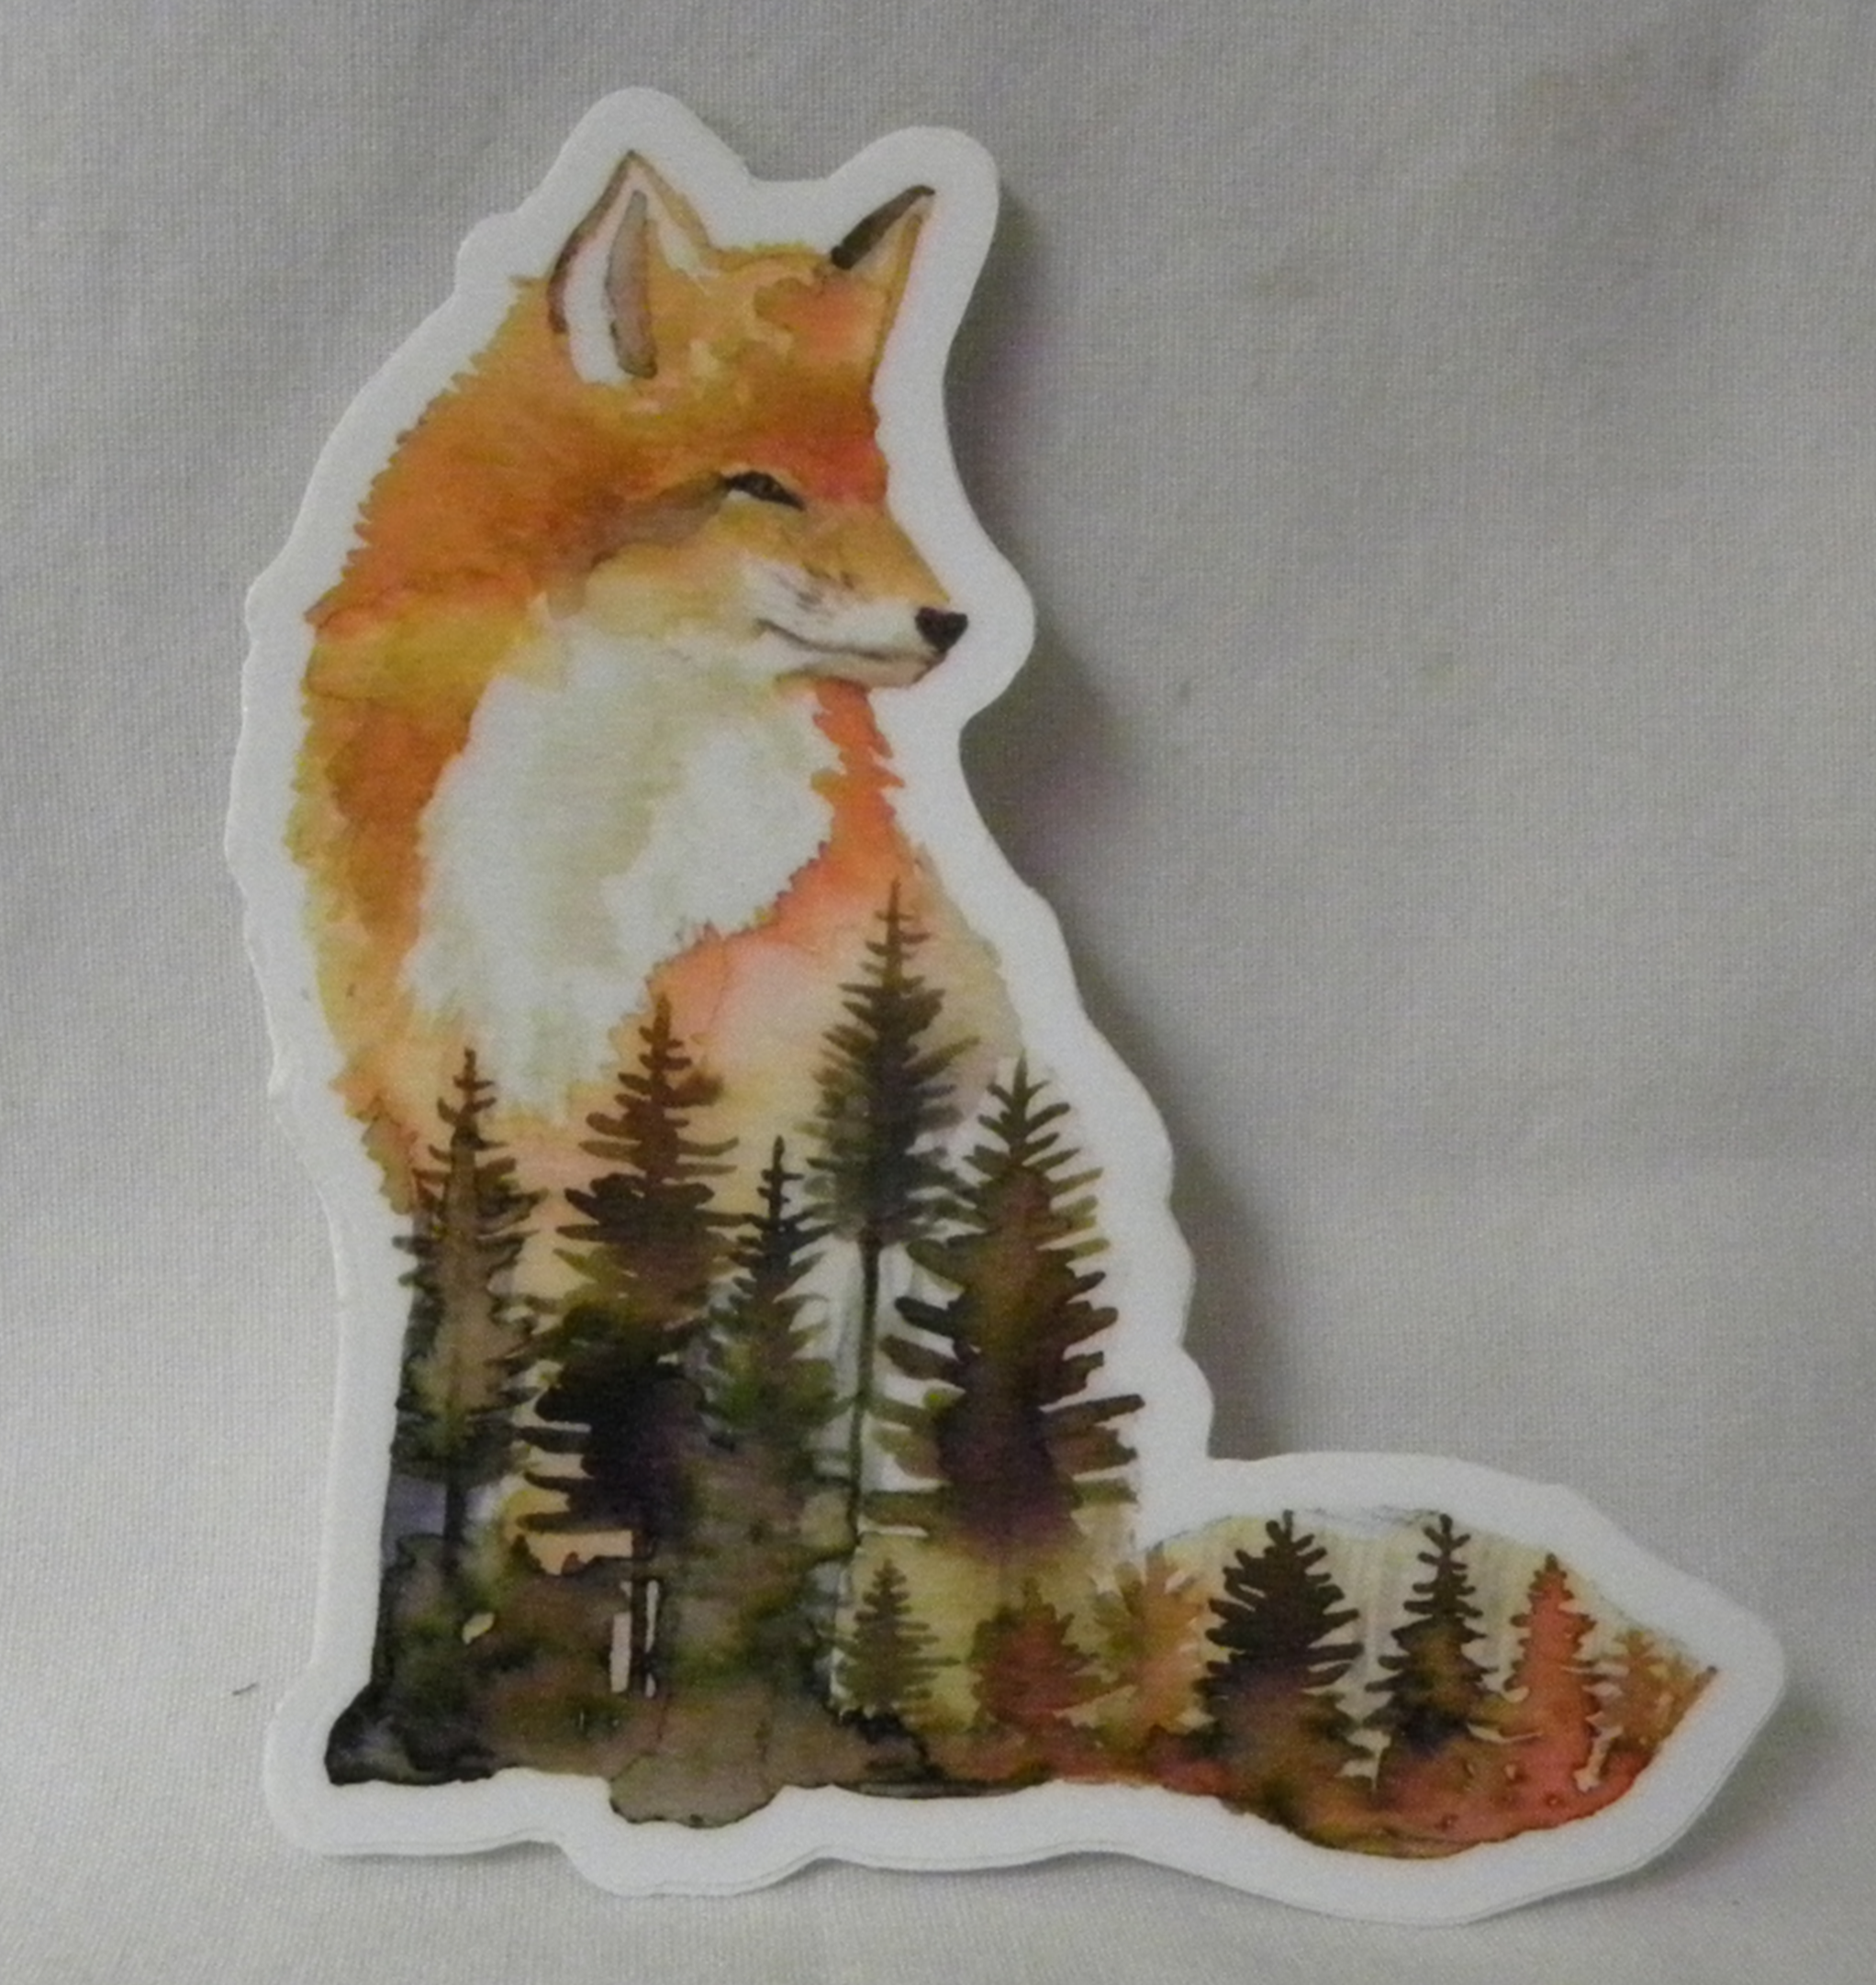 https://wolfhollowwildlife.org/wp-content/uploads/2020/12/Water-Color-Fox.png